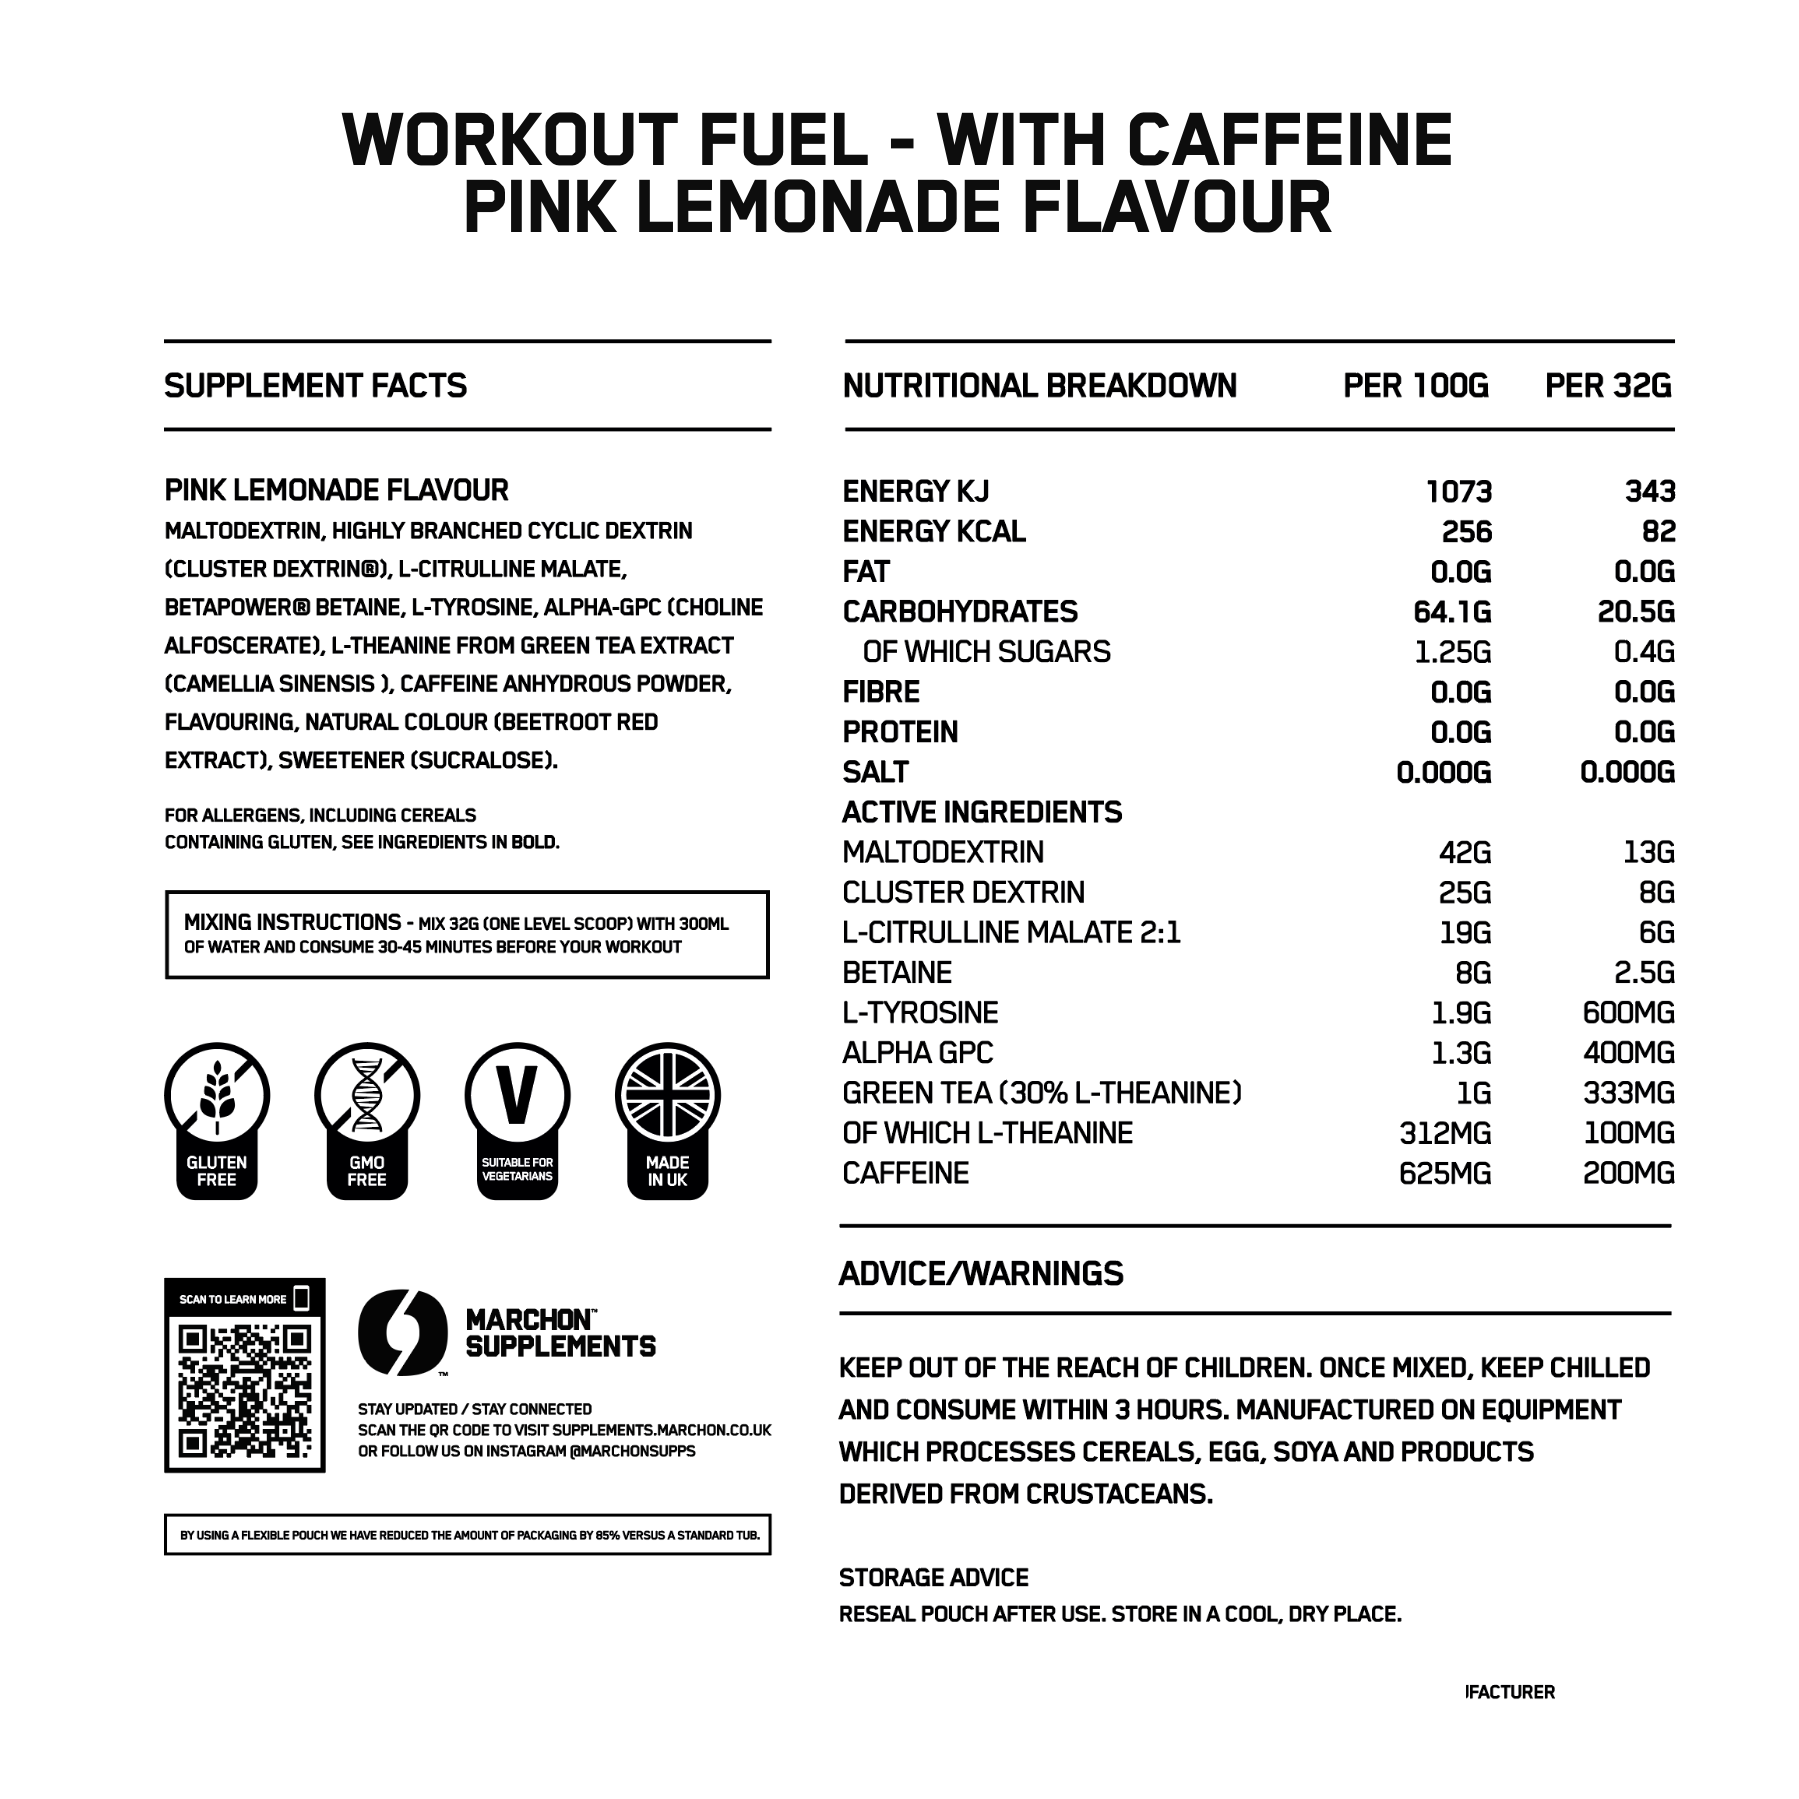 Workout Fuel - With Caffeine